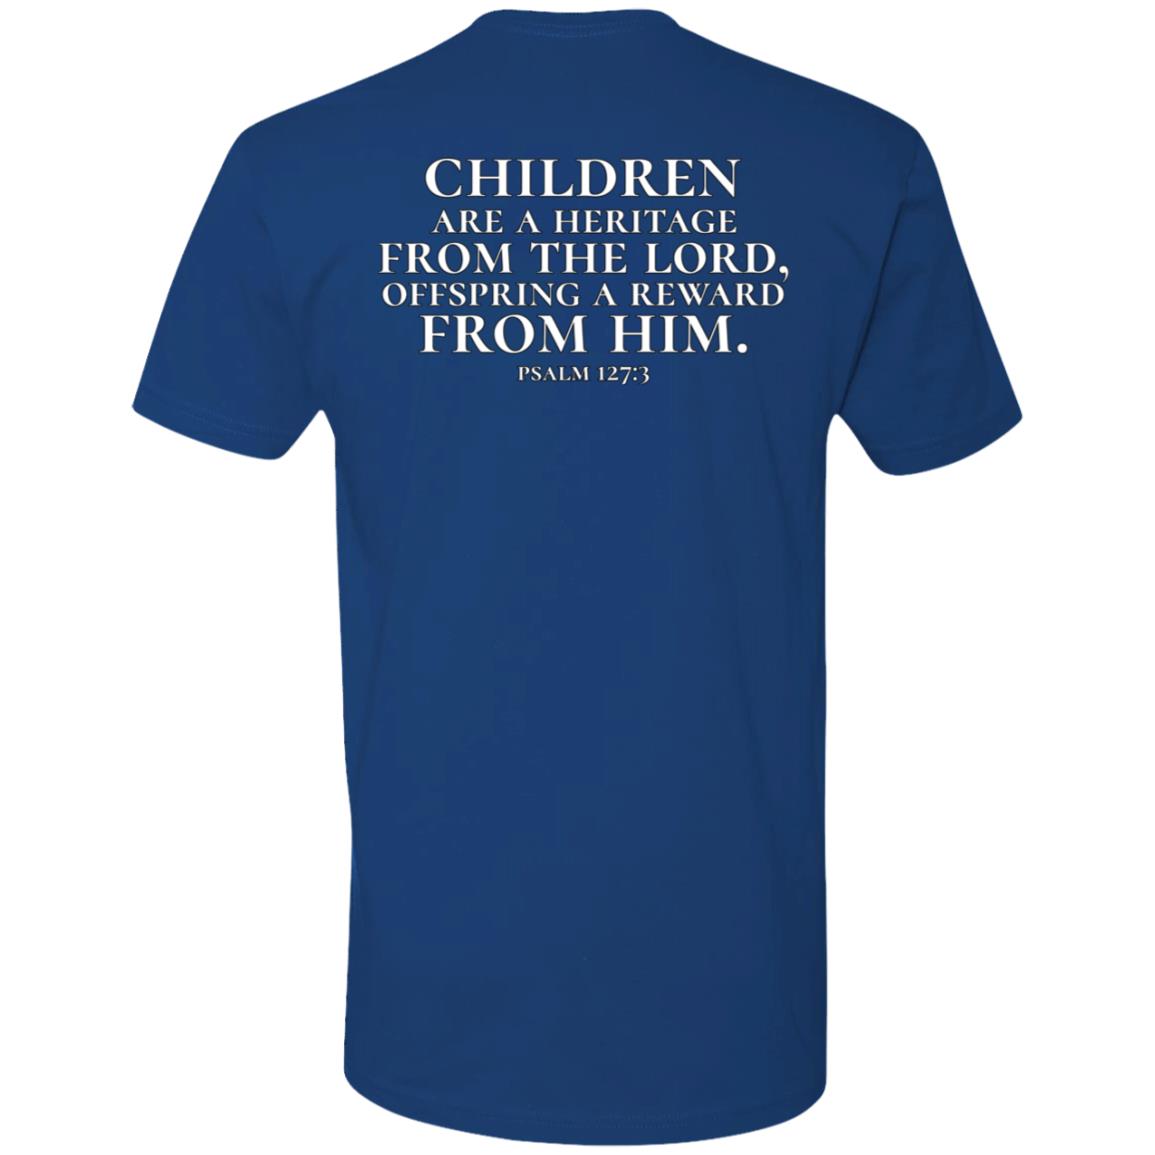 Why We Protect Our Children (Unisex Tee)